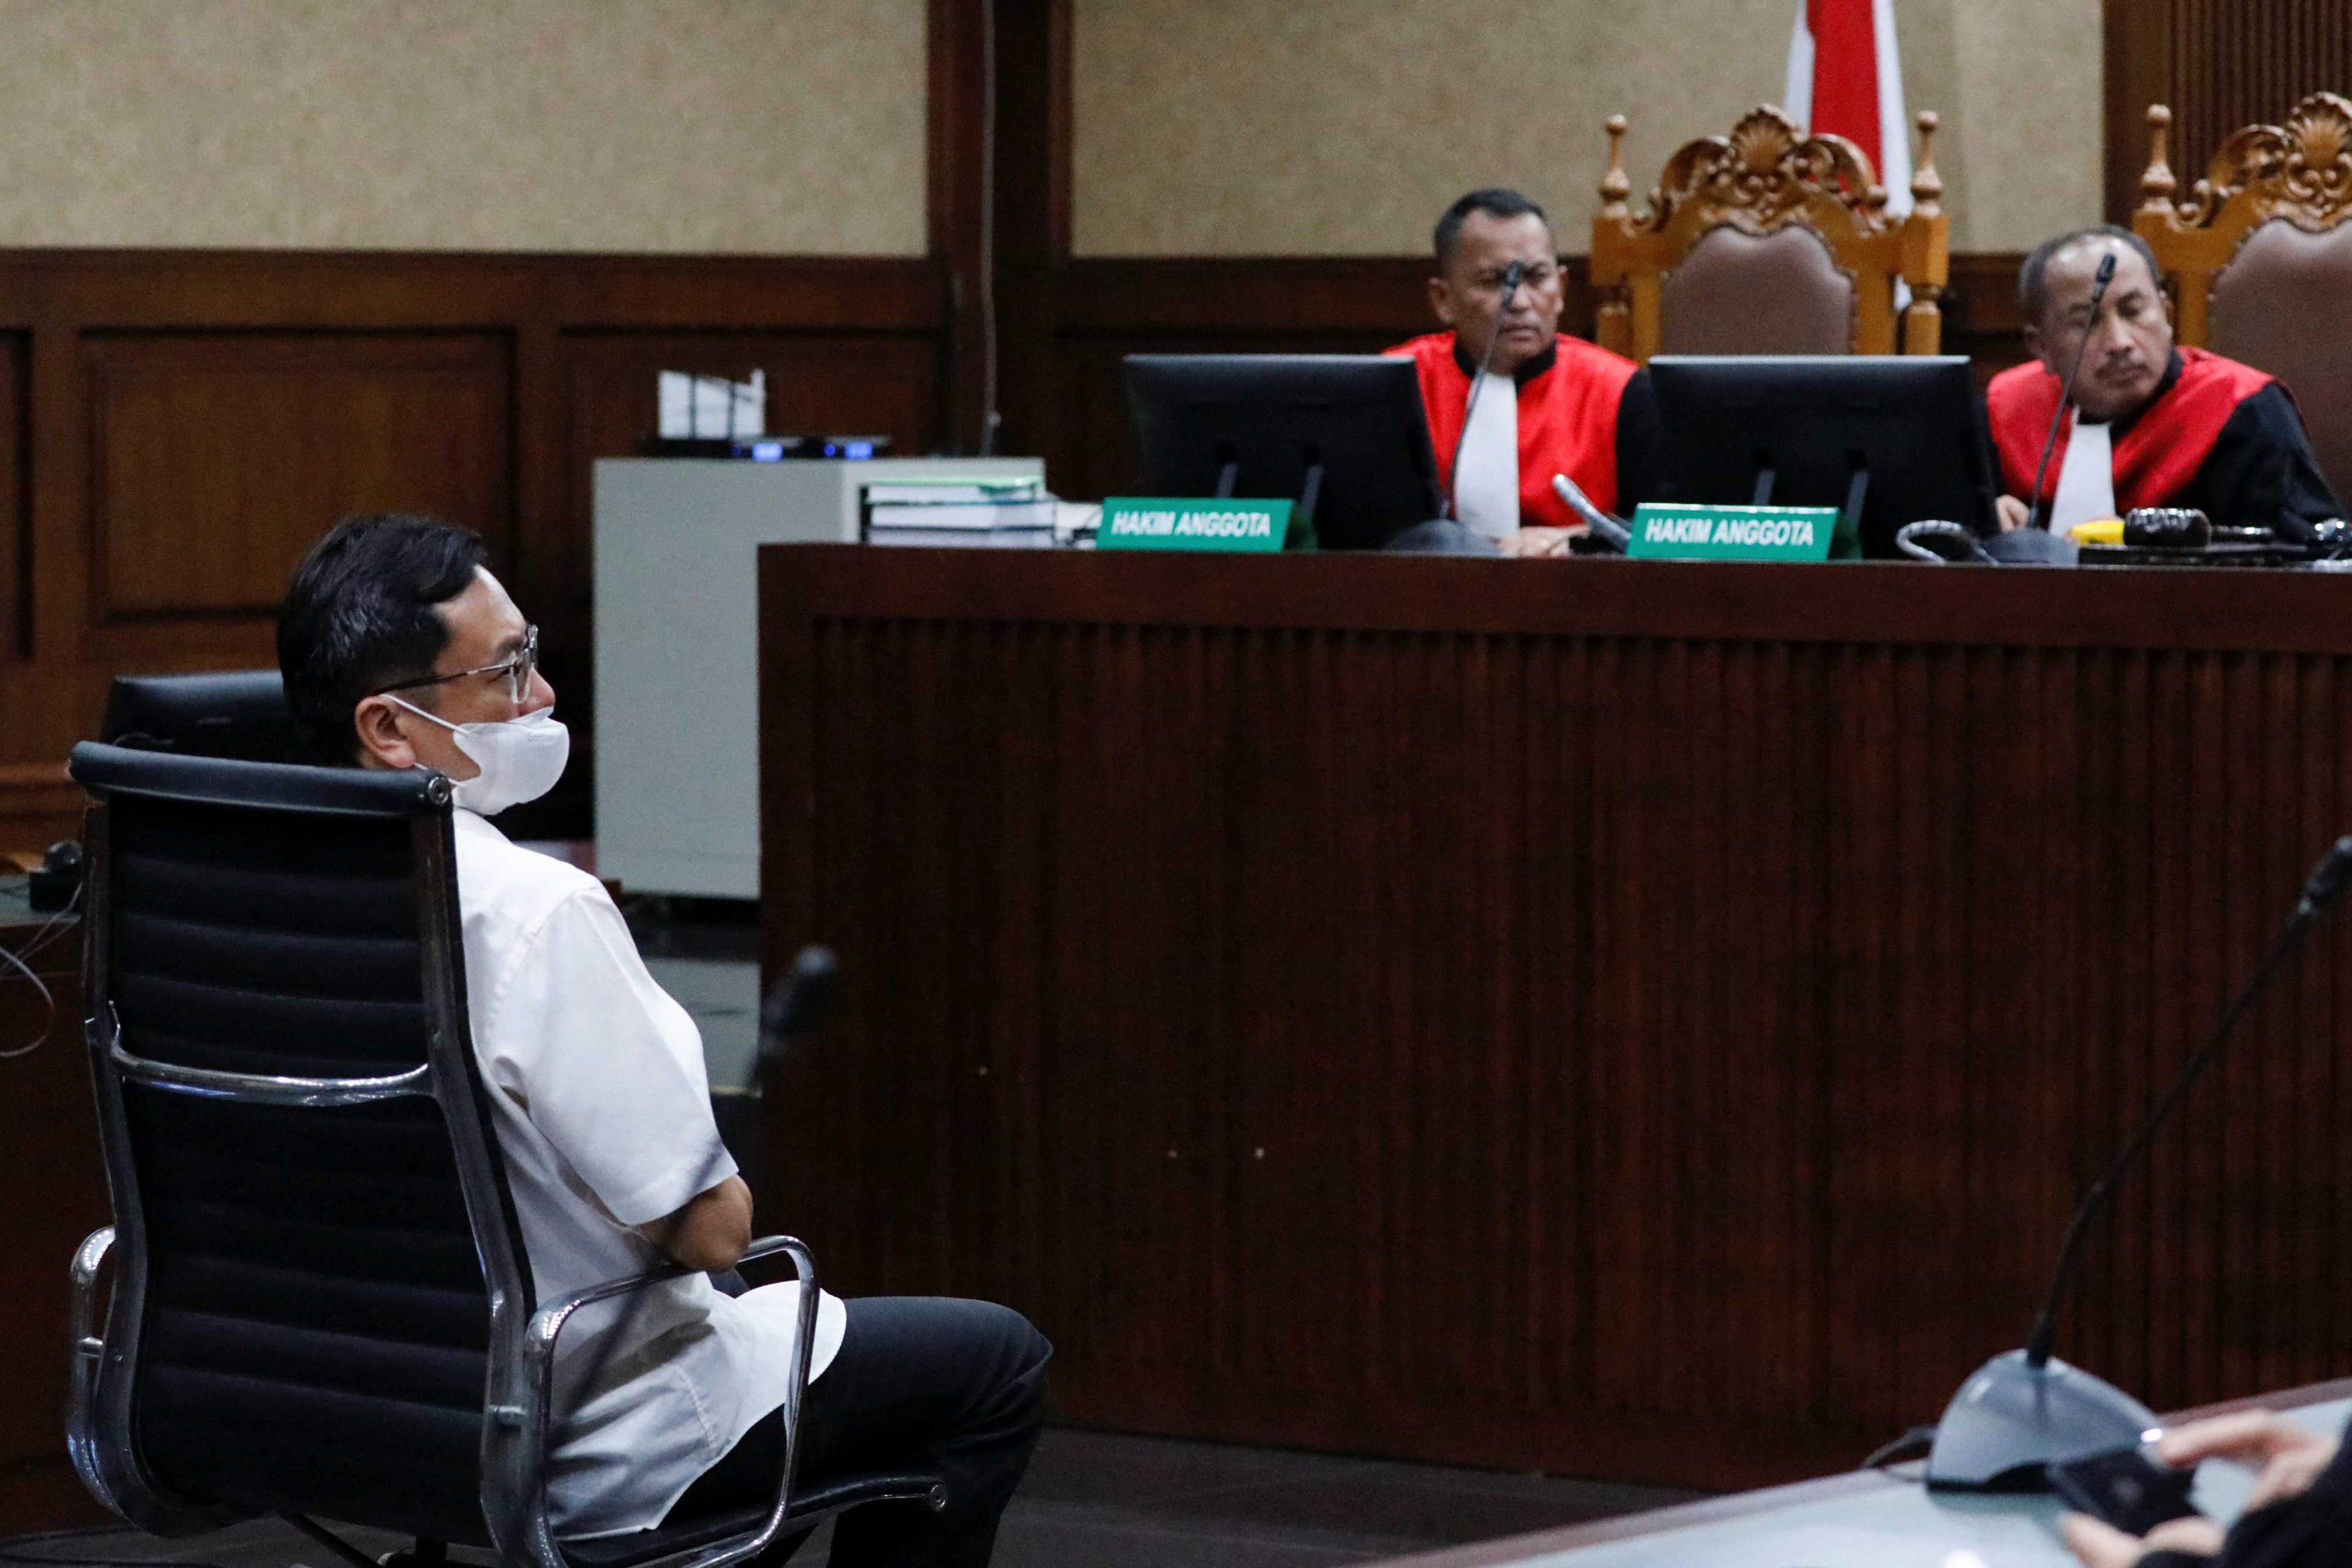 Benny Tjokrosaputro is seen during a hearing on the allegation of manipulating investment decisions at a state insurance firm Asabri, at the court in Jakarta, Indonesia, Jan 12. Photo: Reuters